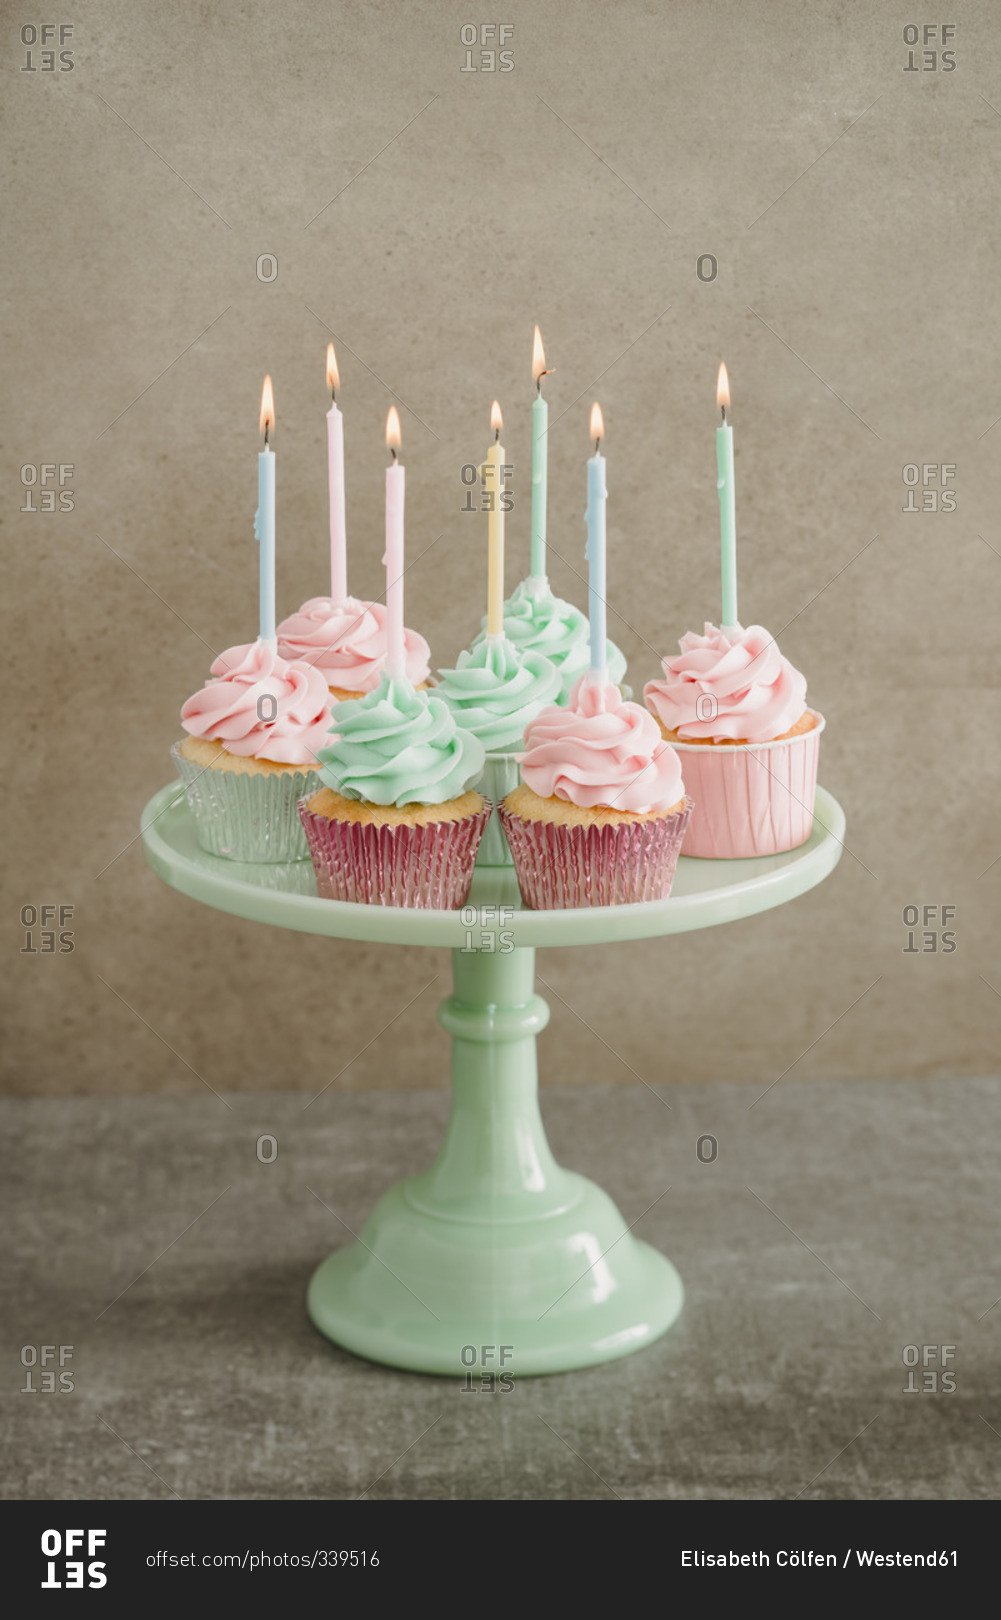 Cup cakes with lighted candles on a cake stand